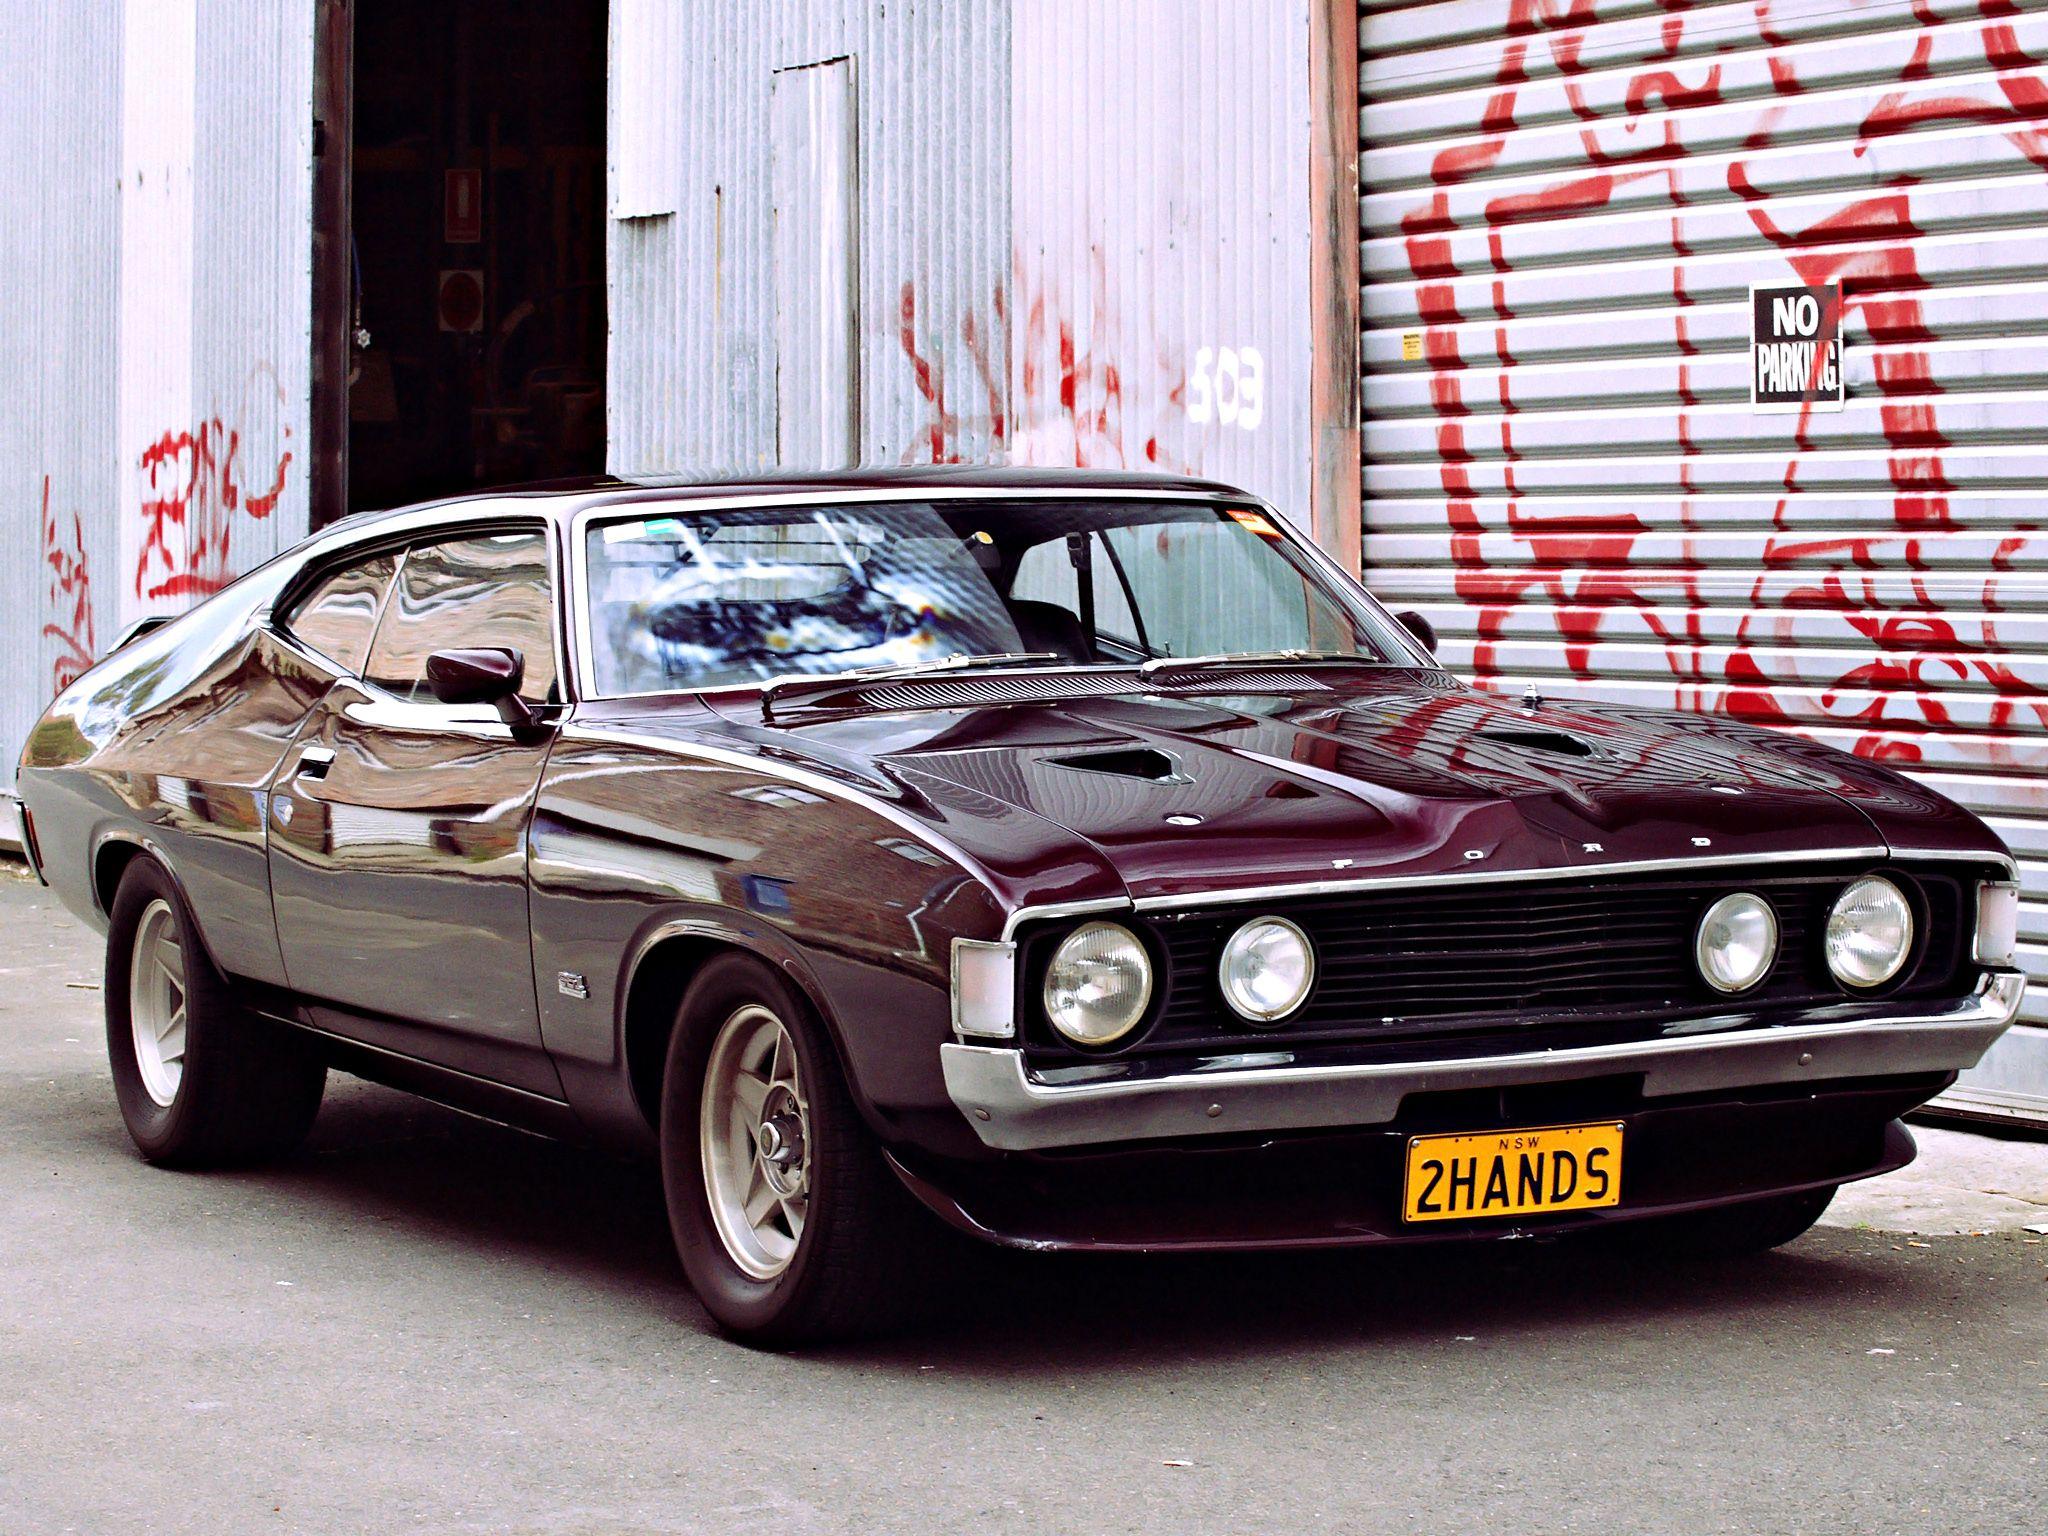 Ford Xy Falcon Wallpapers